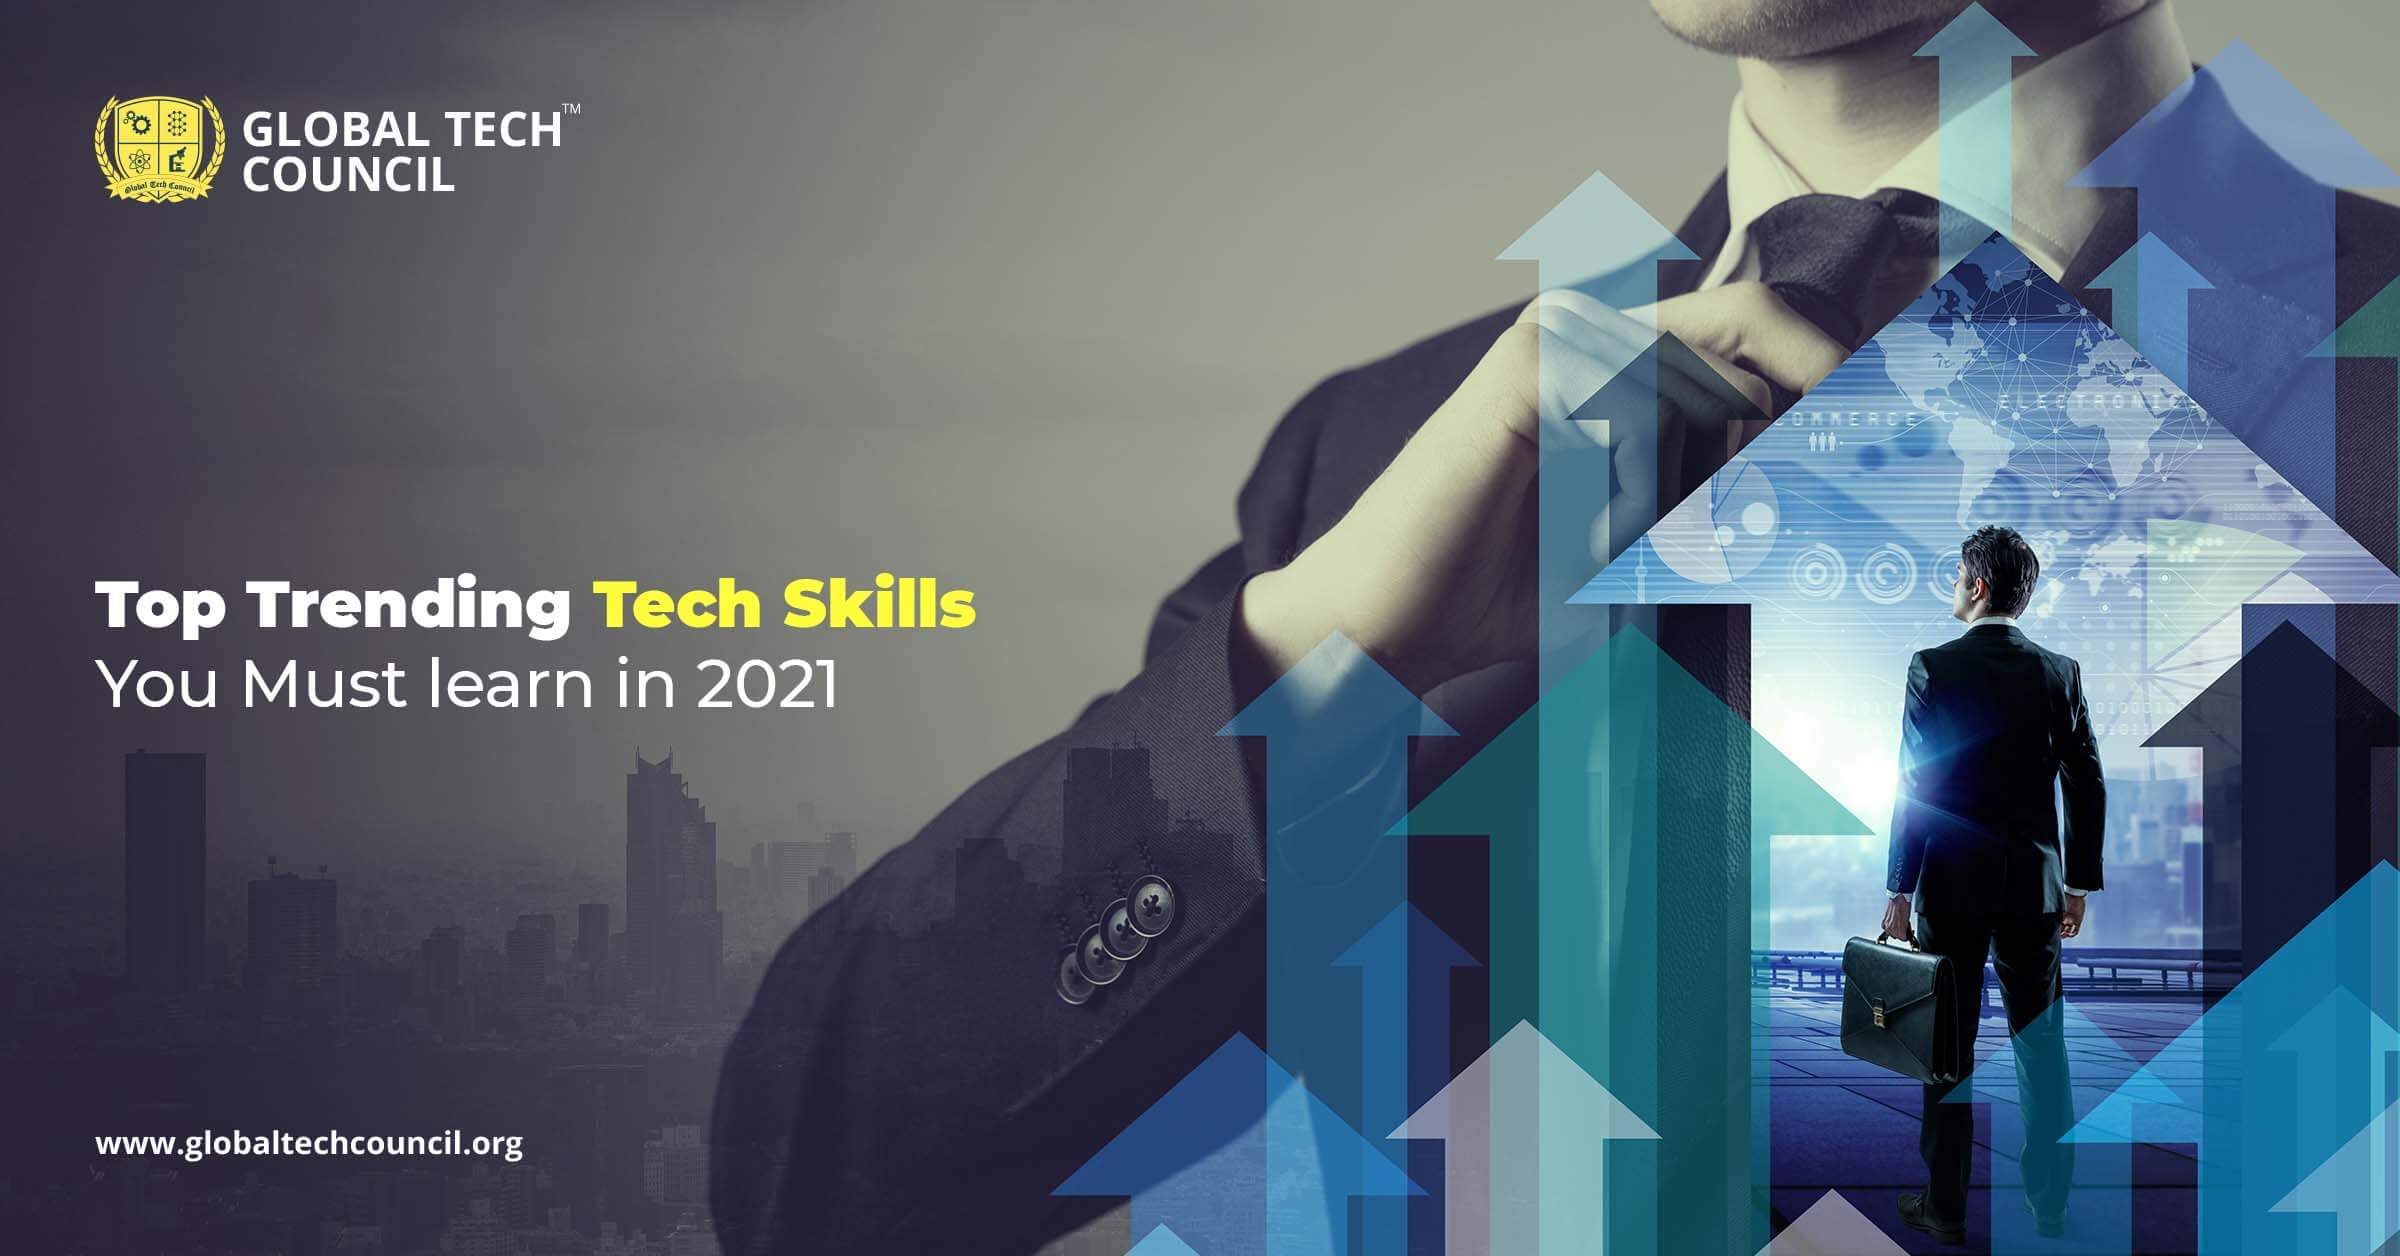 Top Trending Tech Skills You Must learn in 2021